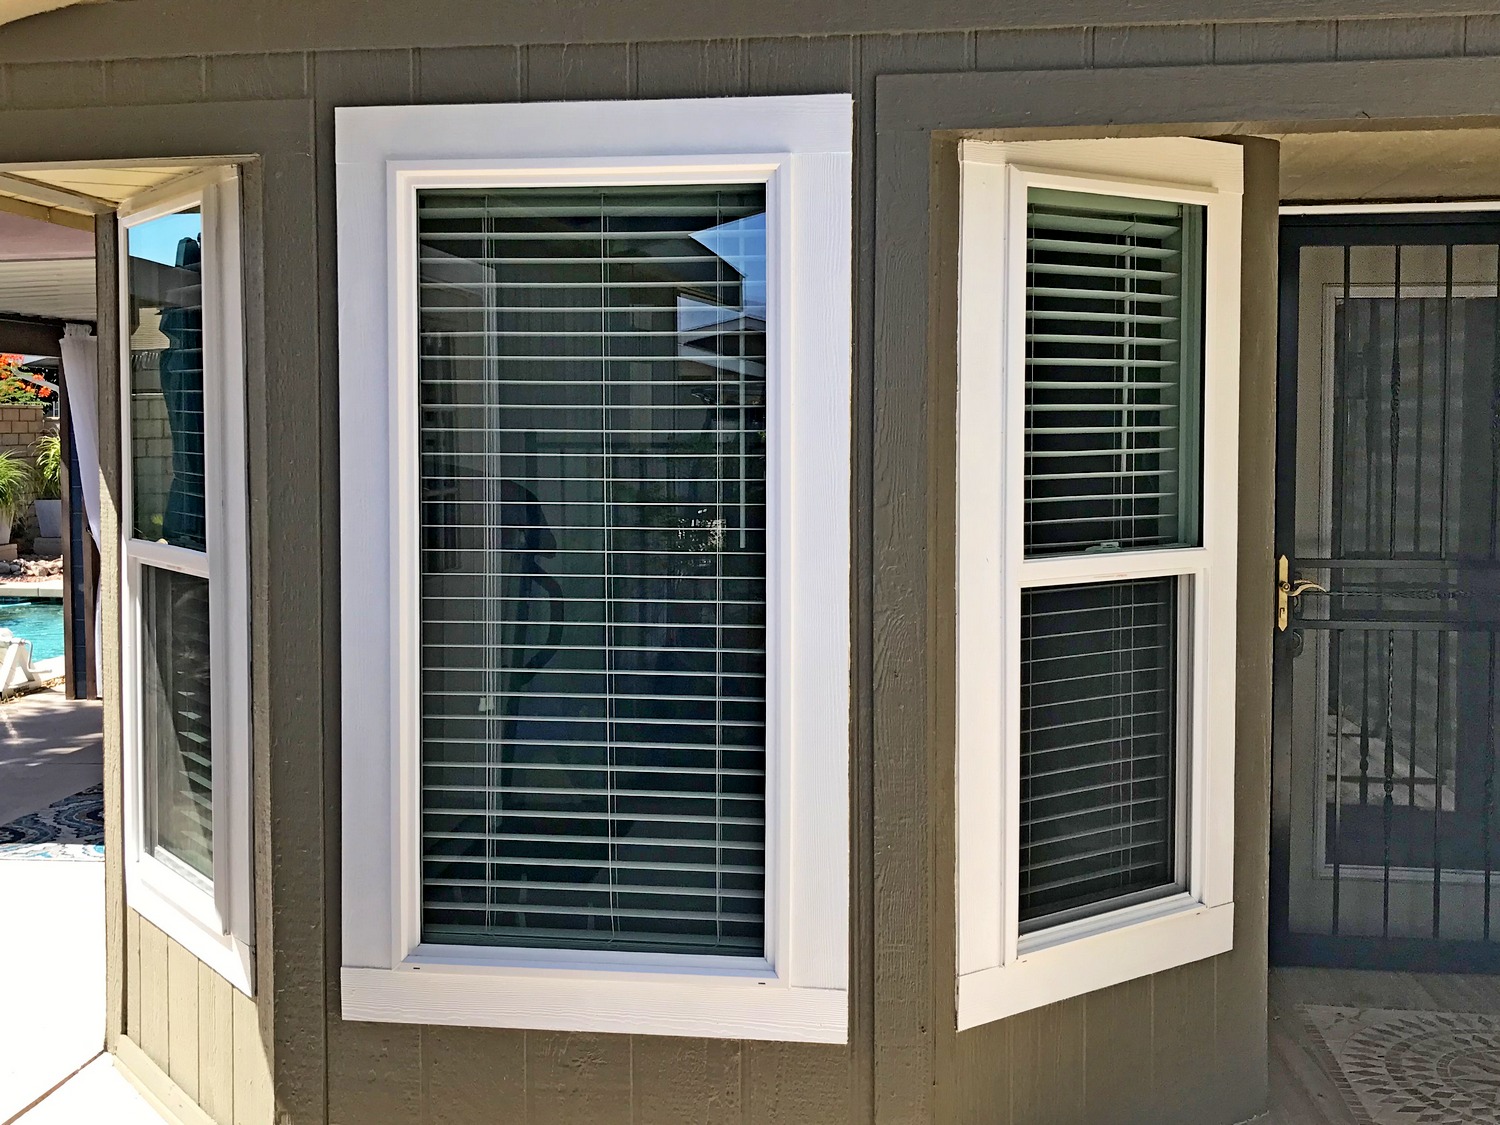 Windows and Sliding Patio Doors Replacement in Thousand Palms